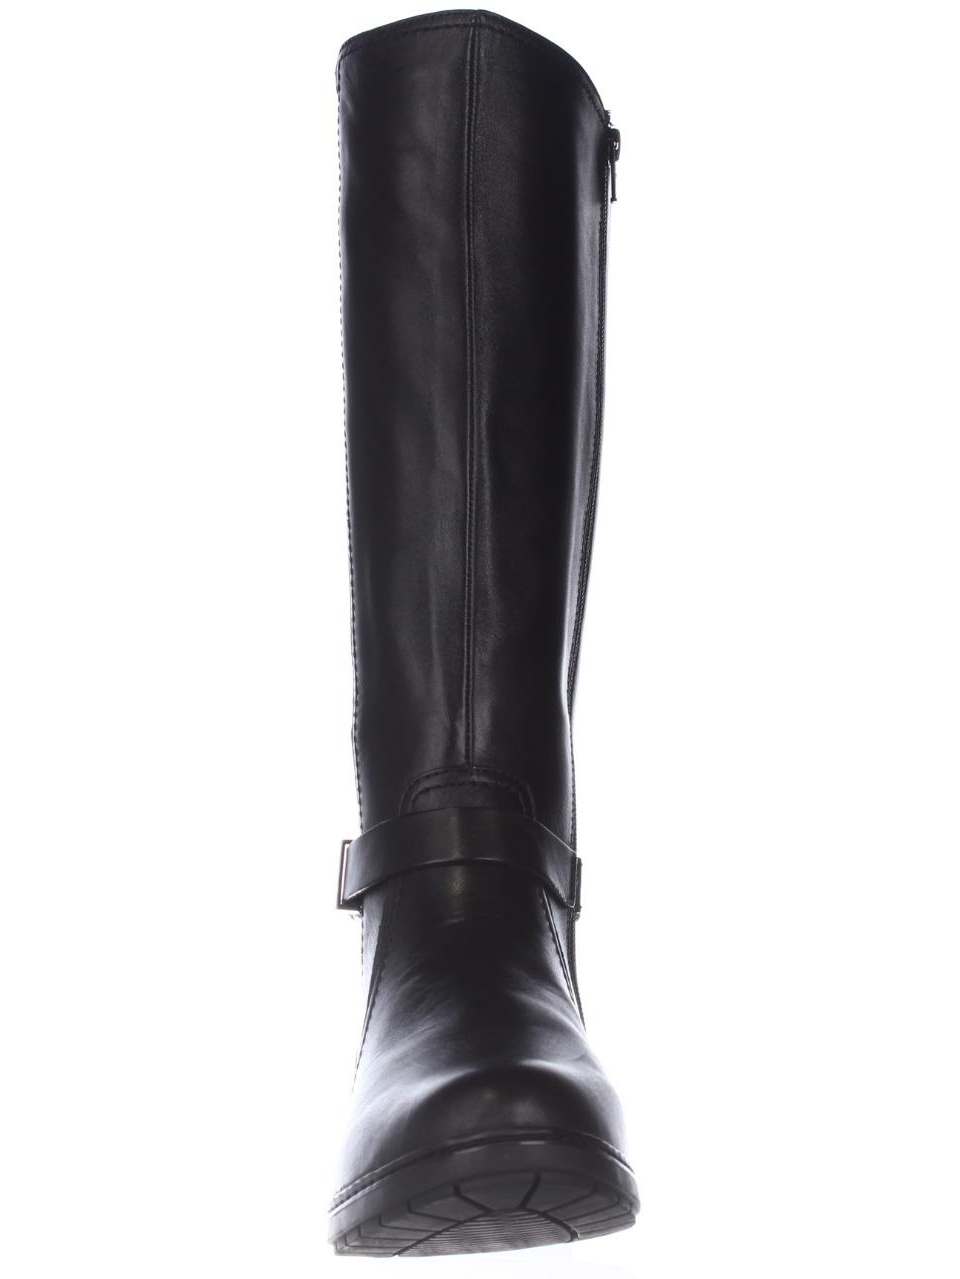 clarks merrian rayna tall leather boots